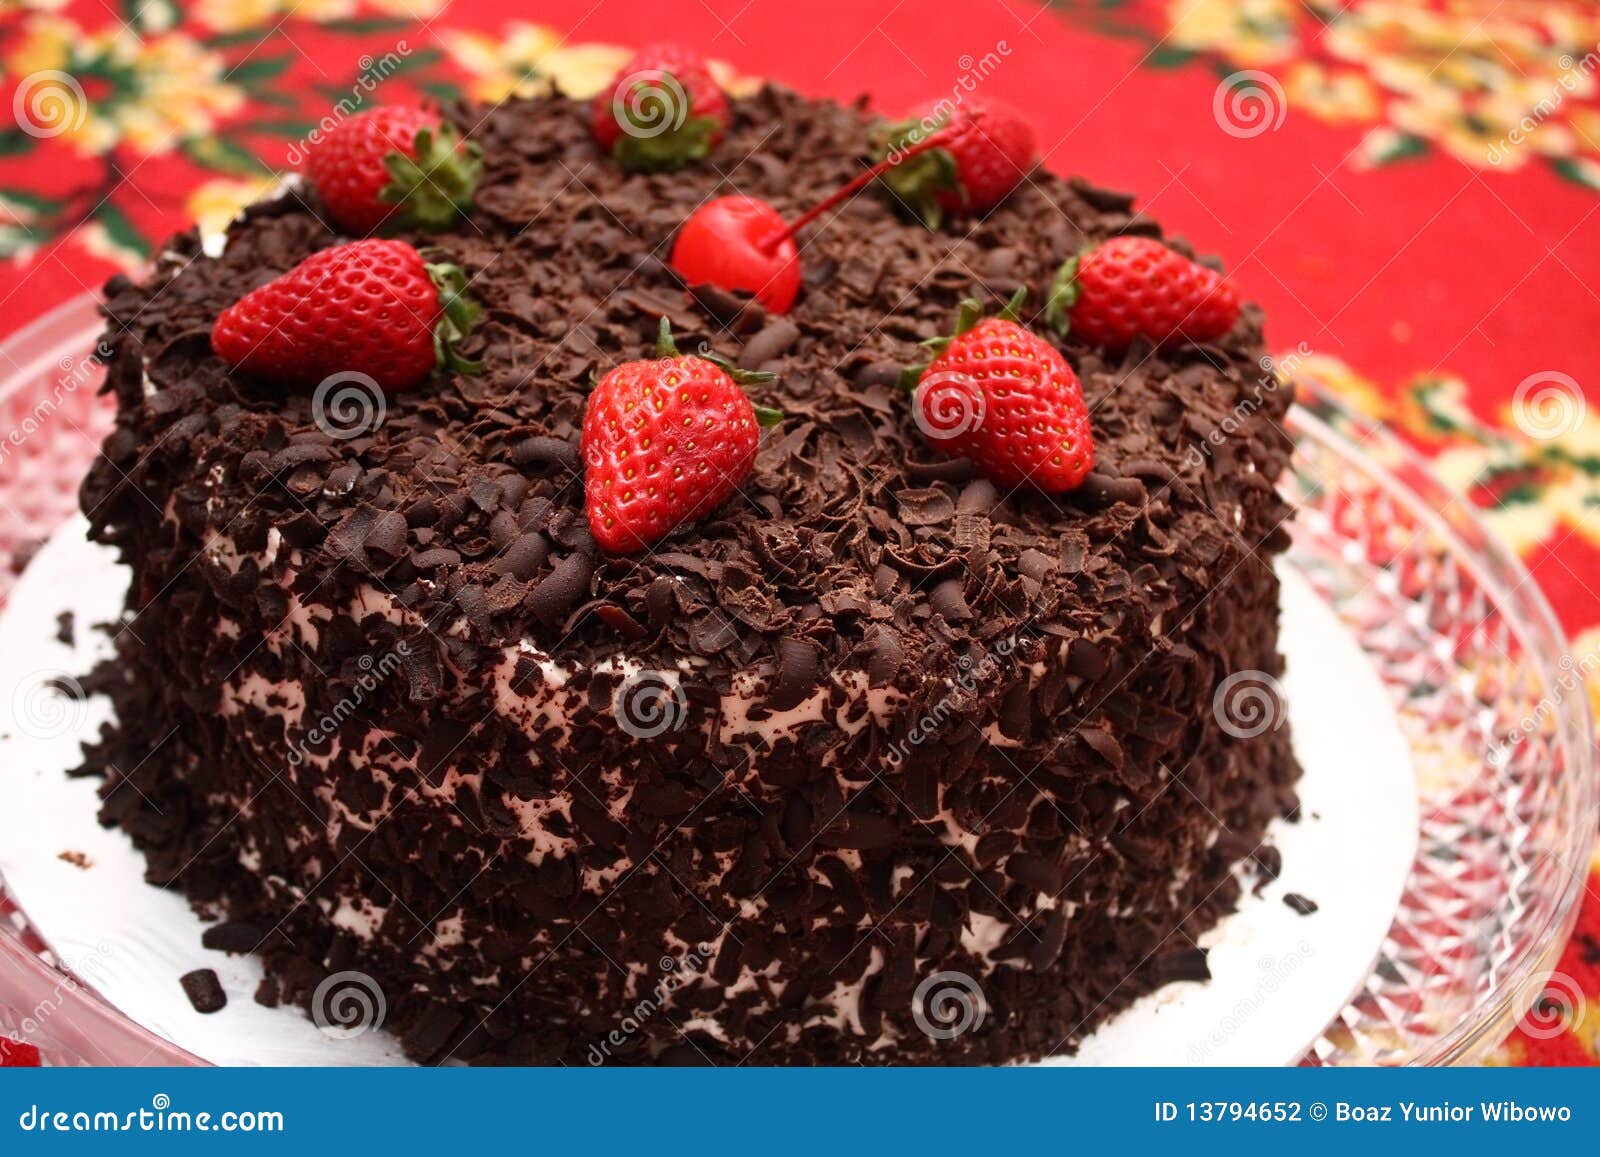 Black Forest Cake stock photo. Image of decorated, object - 13794652